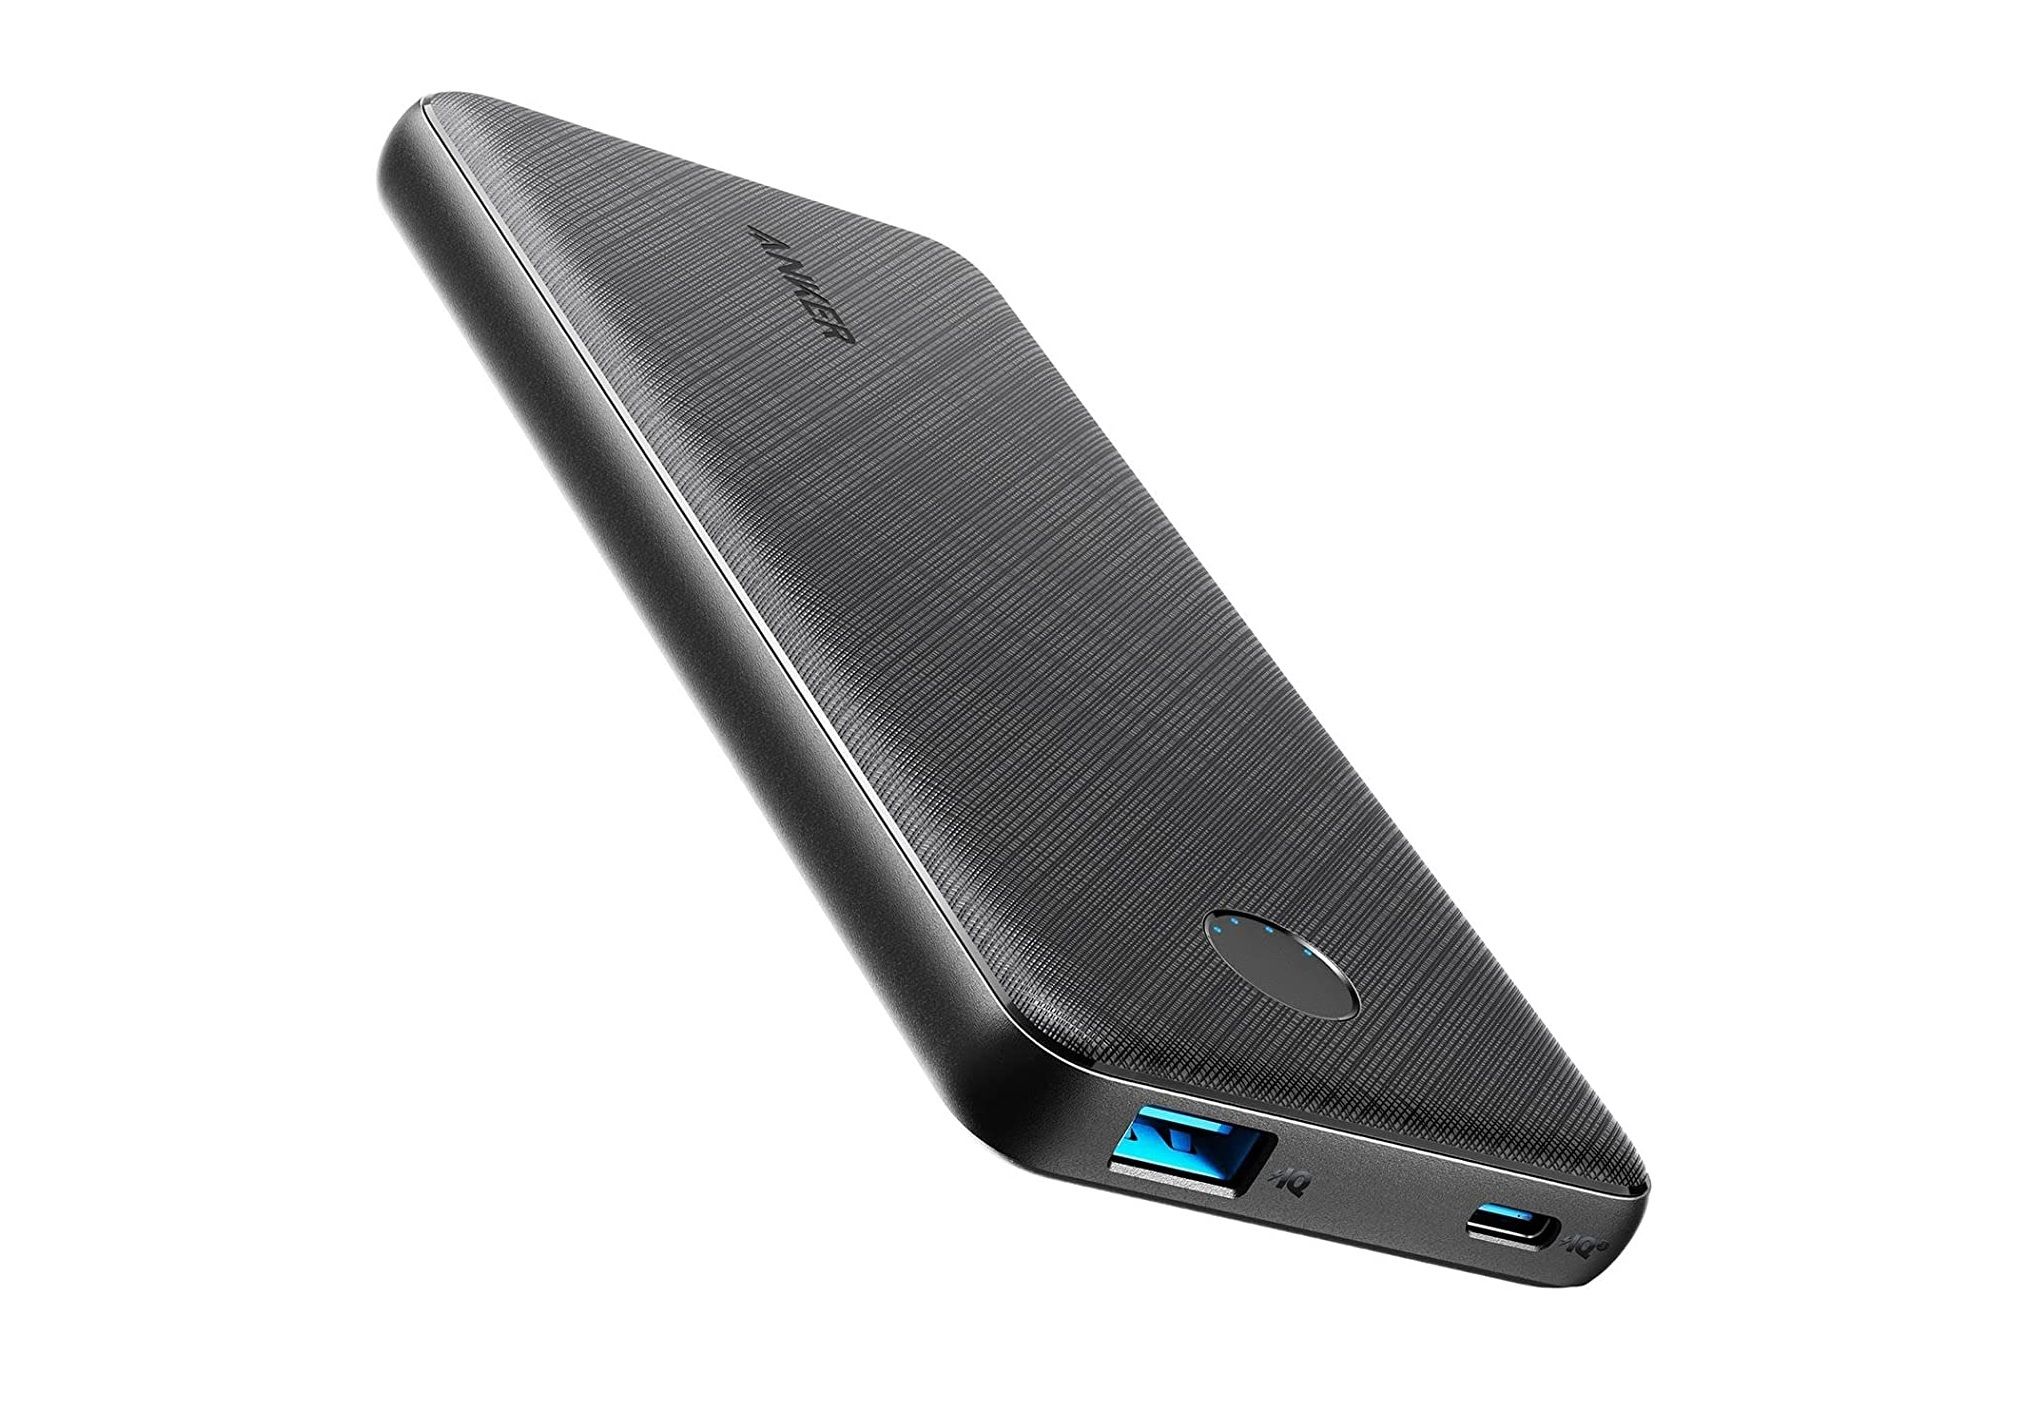 the anker 523 power bank featuring USB-C, USB-A, and a black finish